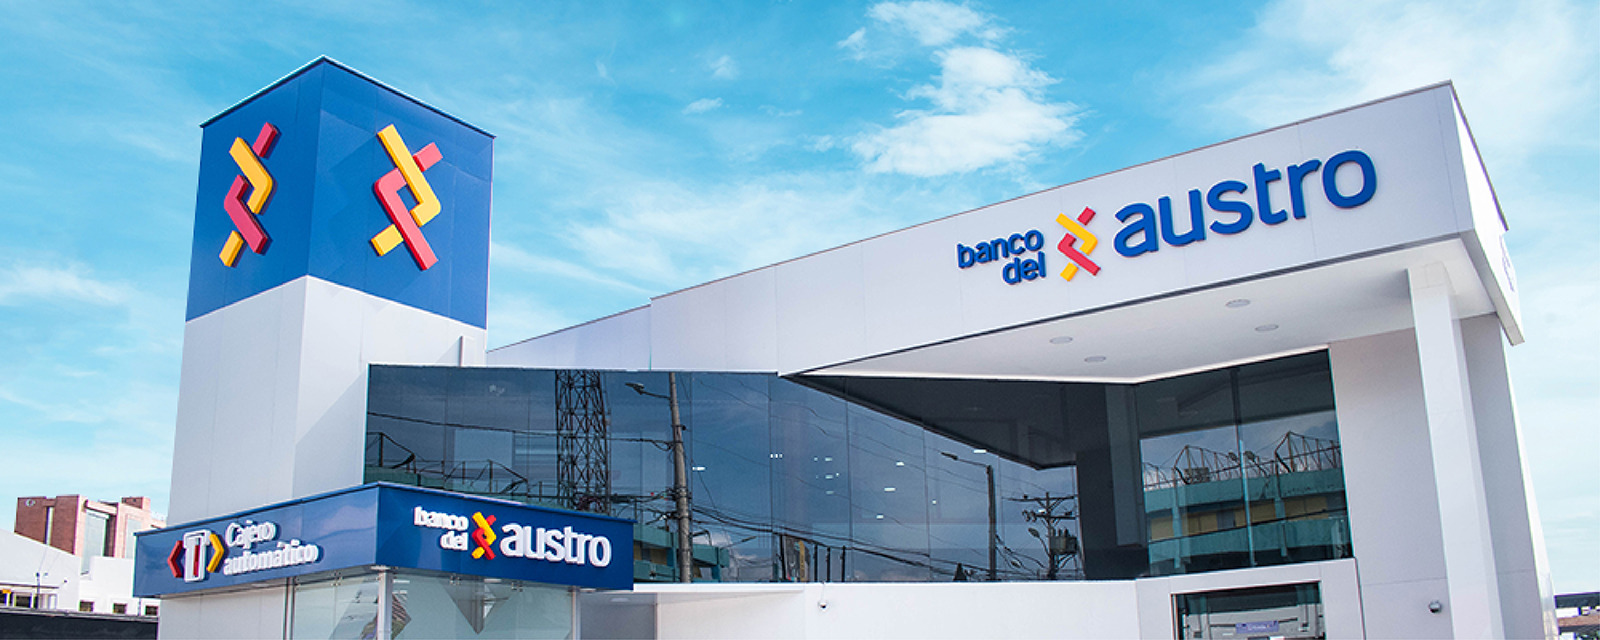 14-fascinating-facts-about-banco-del-austro